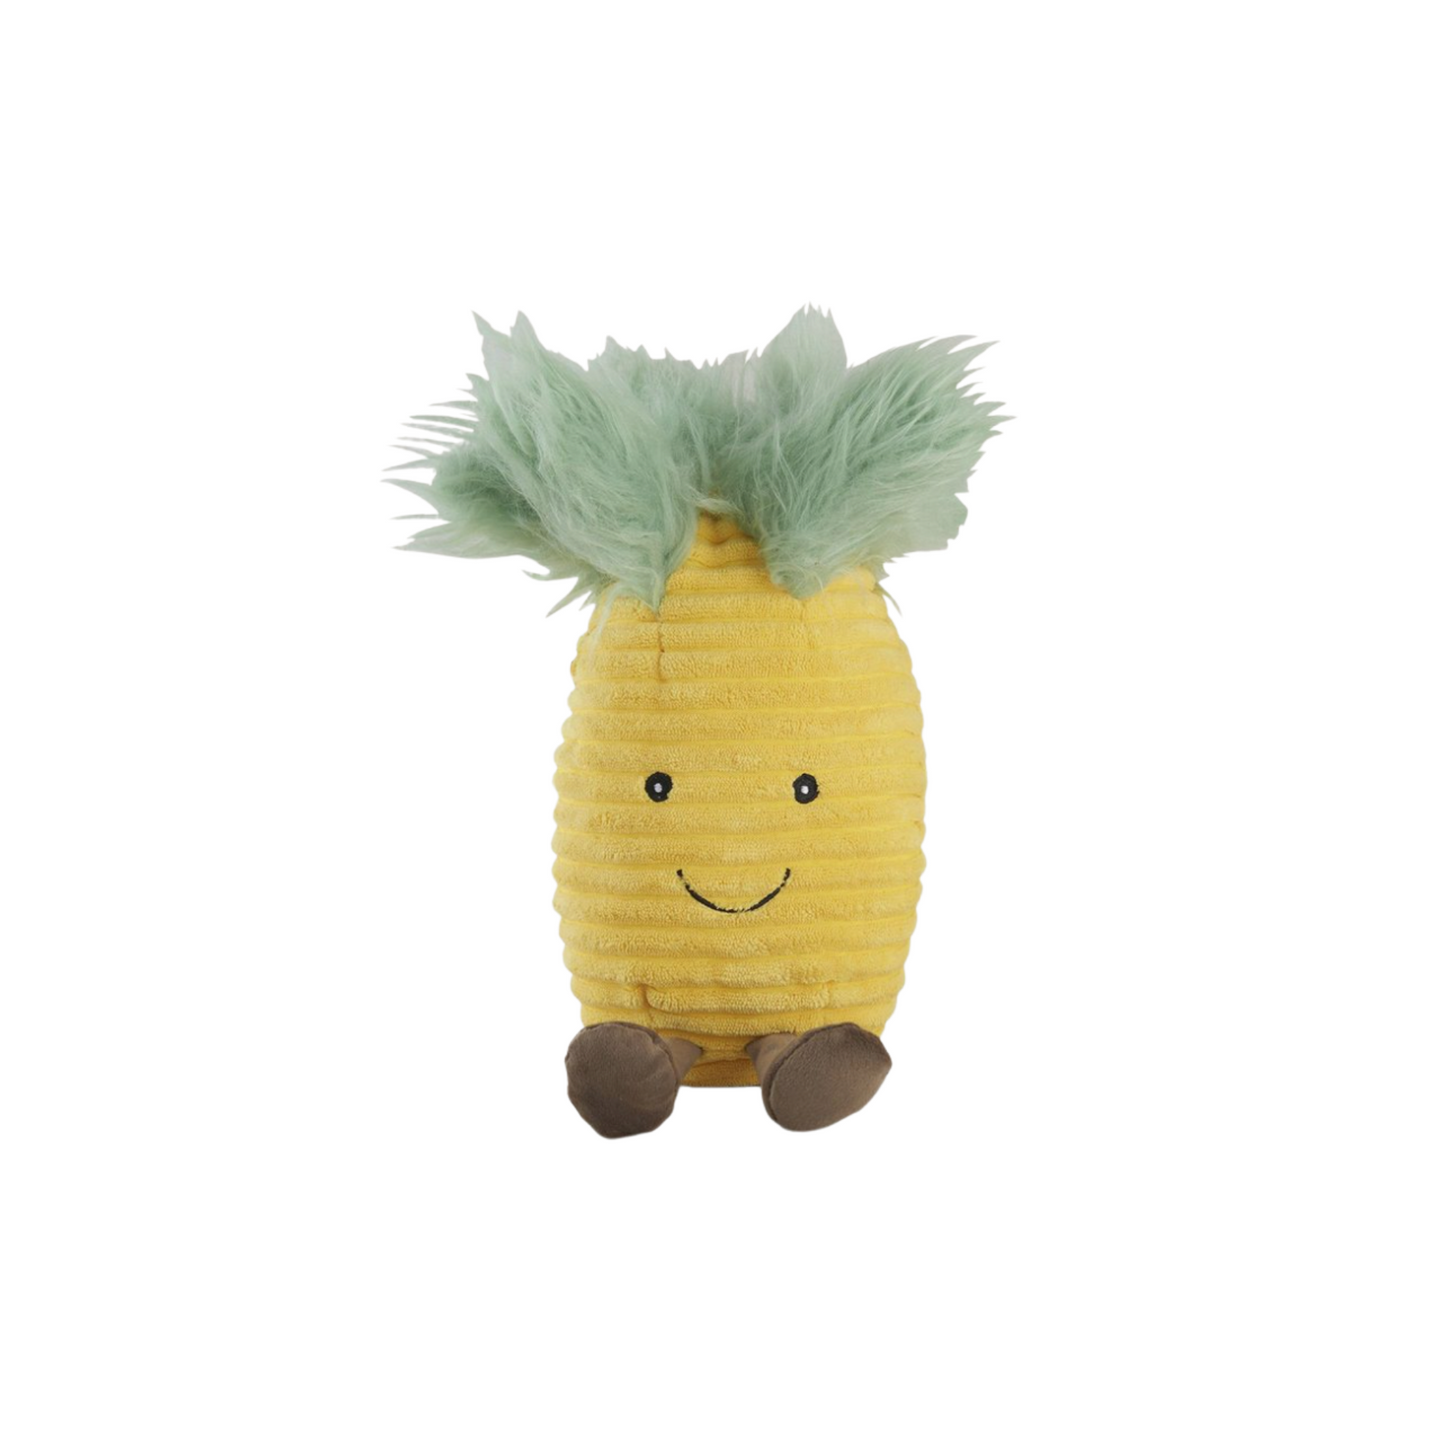 The cutest looking Pineapple dog toy you've ever seen